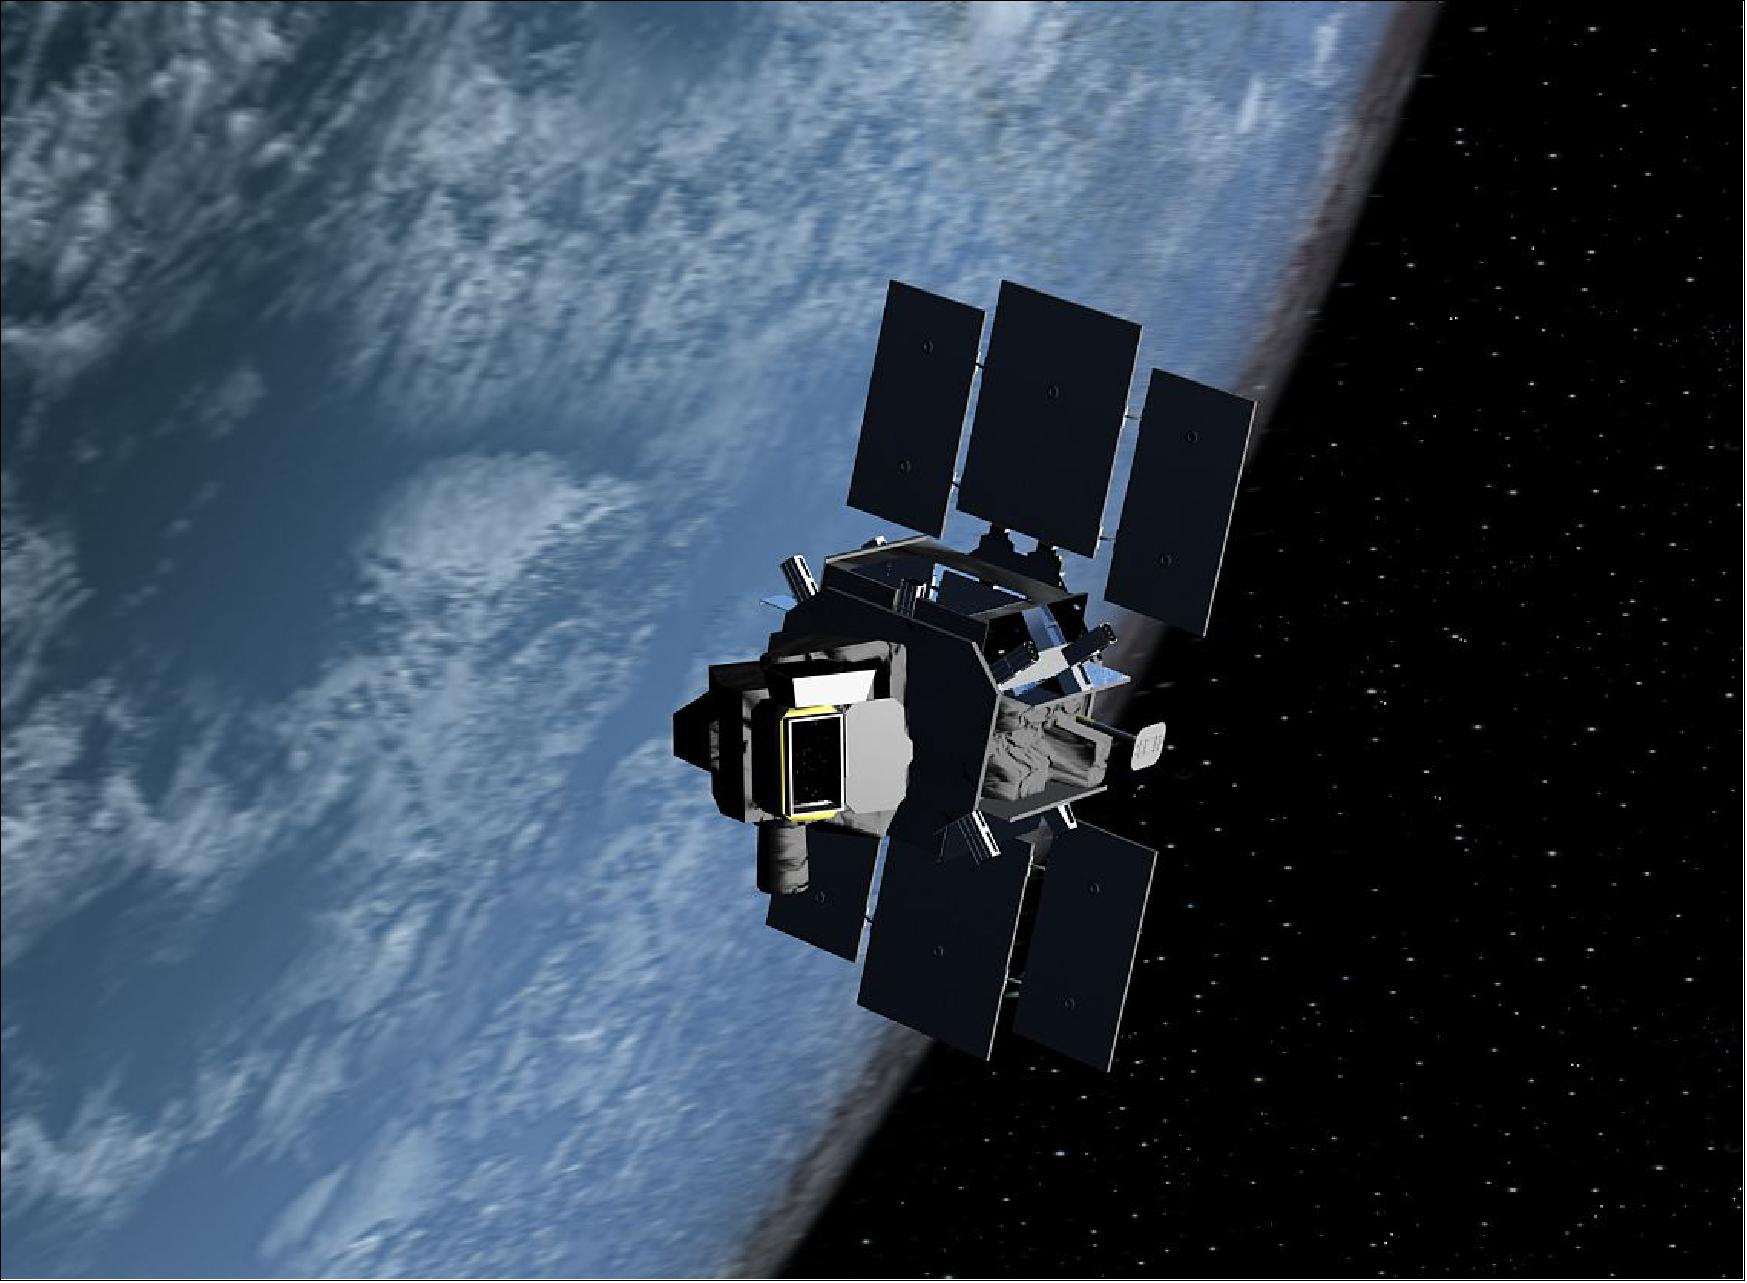 Figure 6: Alternate view of the deployed SBSS spacecraft (image credit: Air Force Space Command )